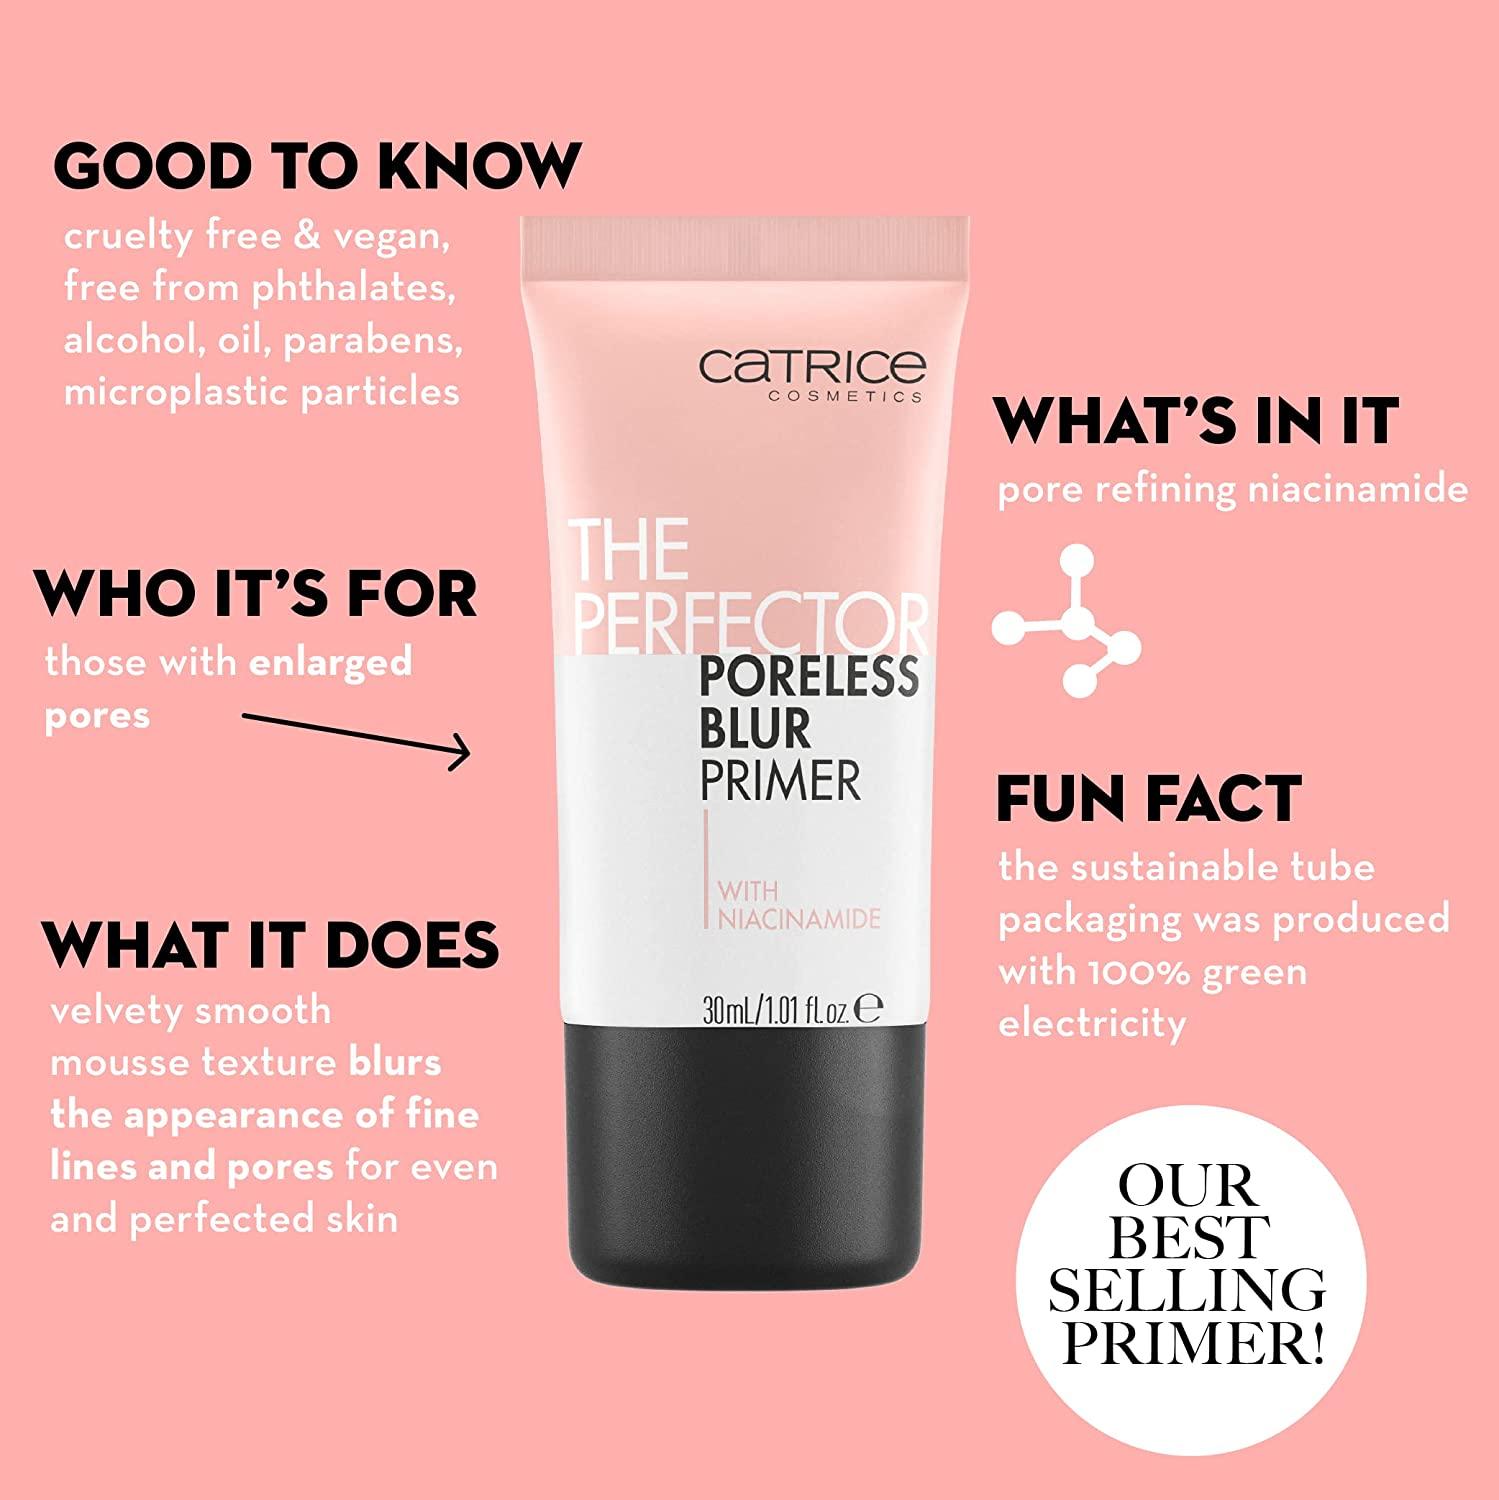 Catrice | Phthalates, Gluten, Niacinamide Parabens, Base Blur & Vegan & | Refining Free with Microplastics Fine Without Made Pore & Poreless Oil, Line | Primer | Make Cruelty Perfector Up Fragrance, The Alcohol